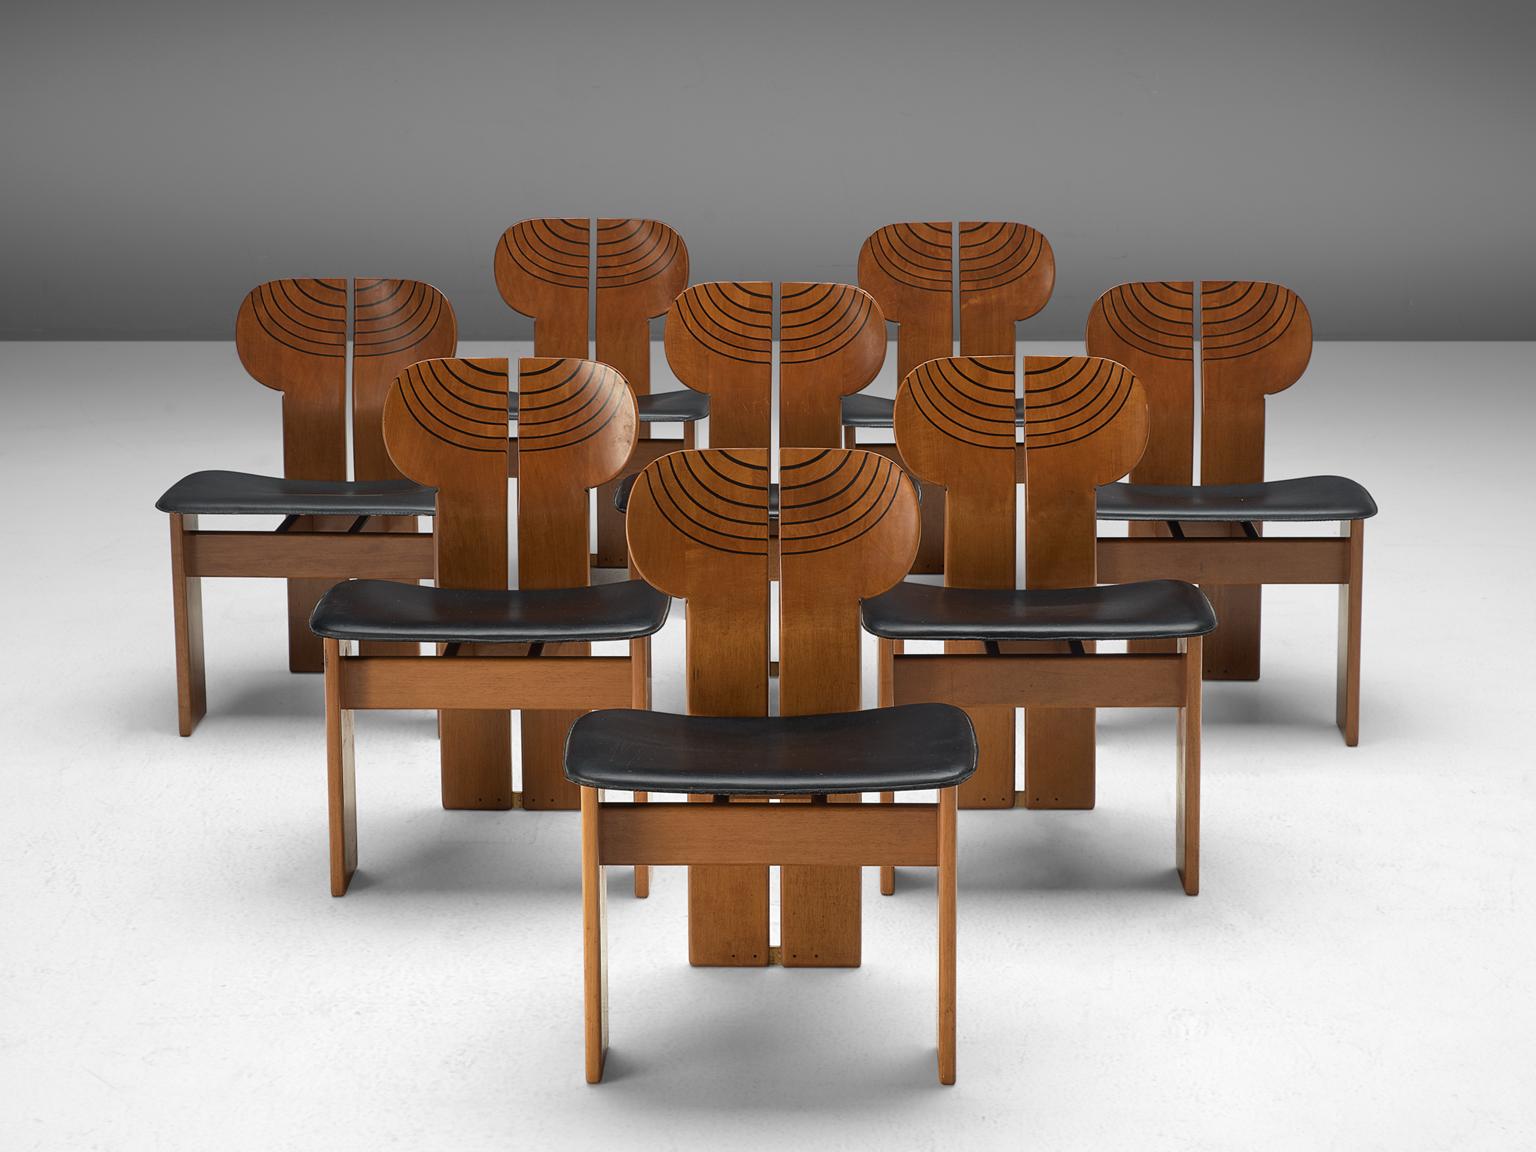 Afra & Tobia Scarpa, eight dining chairs, black leather, walnut, ebony and brass, Maxalto, Italy, 1975.

This set of chairs explicitly sculptural grand chairs are by Afra & Tobia Scarpa and are titled 'Africa' and are part of the Artona collection